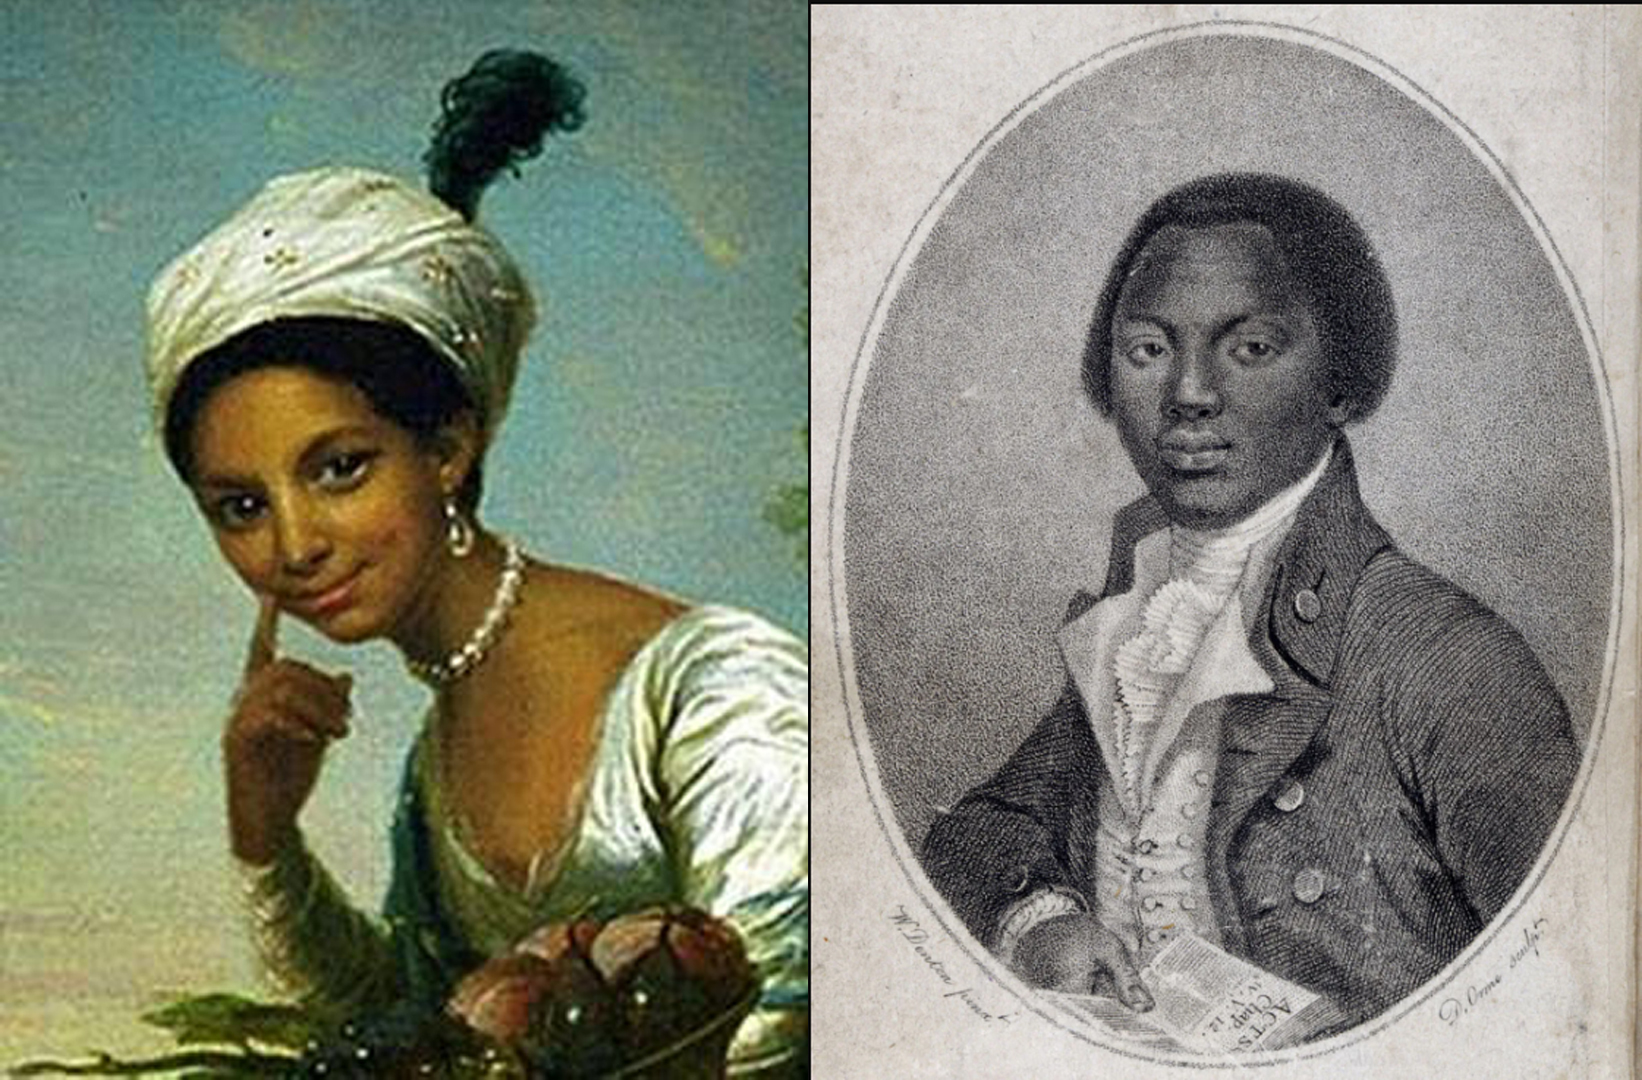 [left] Dido Elizabeth Belle and [right] Olaudah Equiano (public domain) We Were Here exhibition by Emily Momoh, CAMDEN